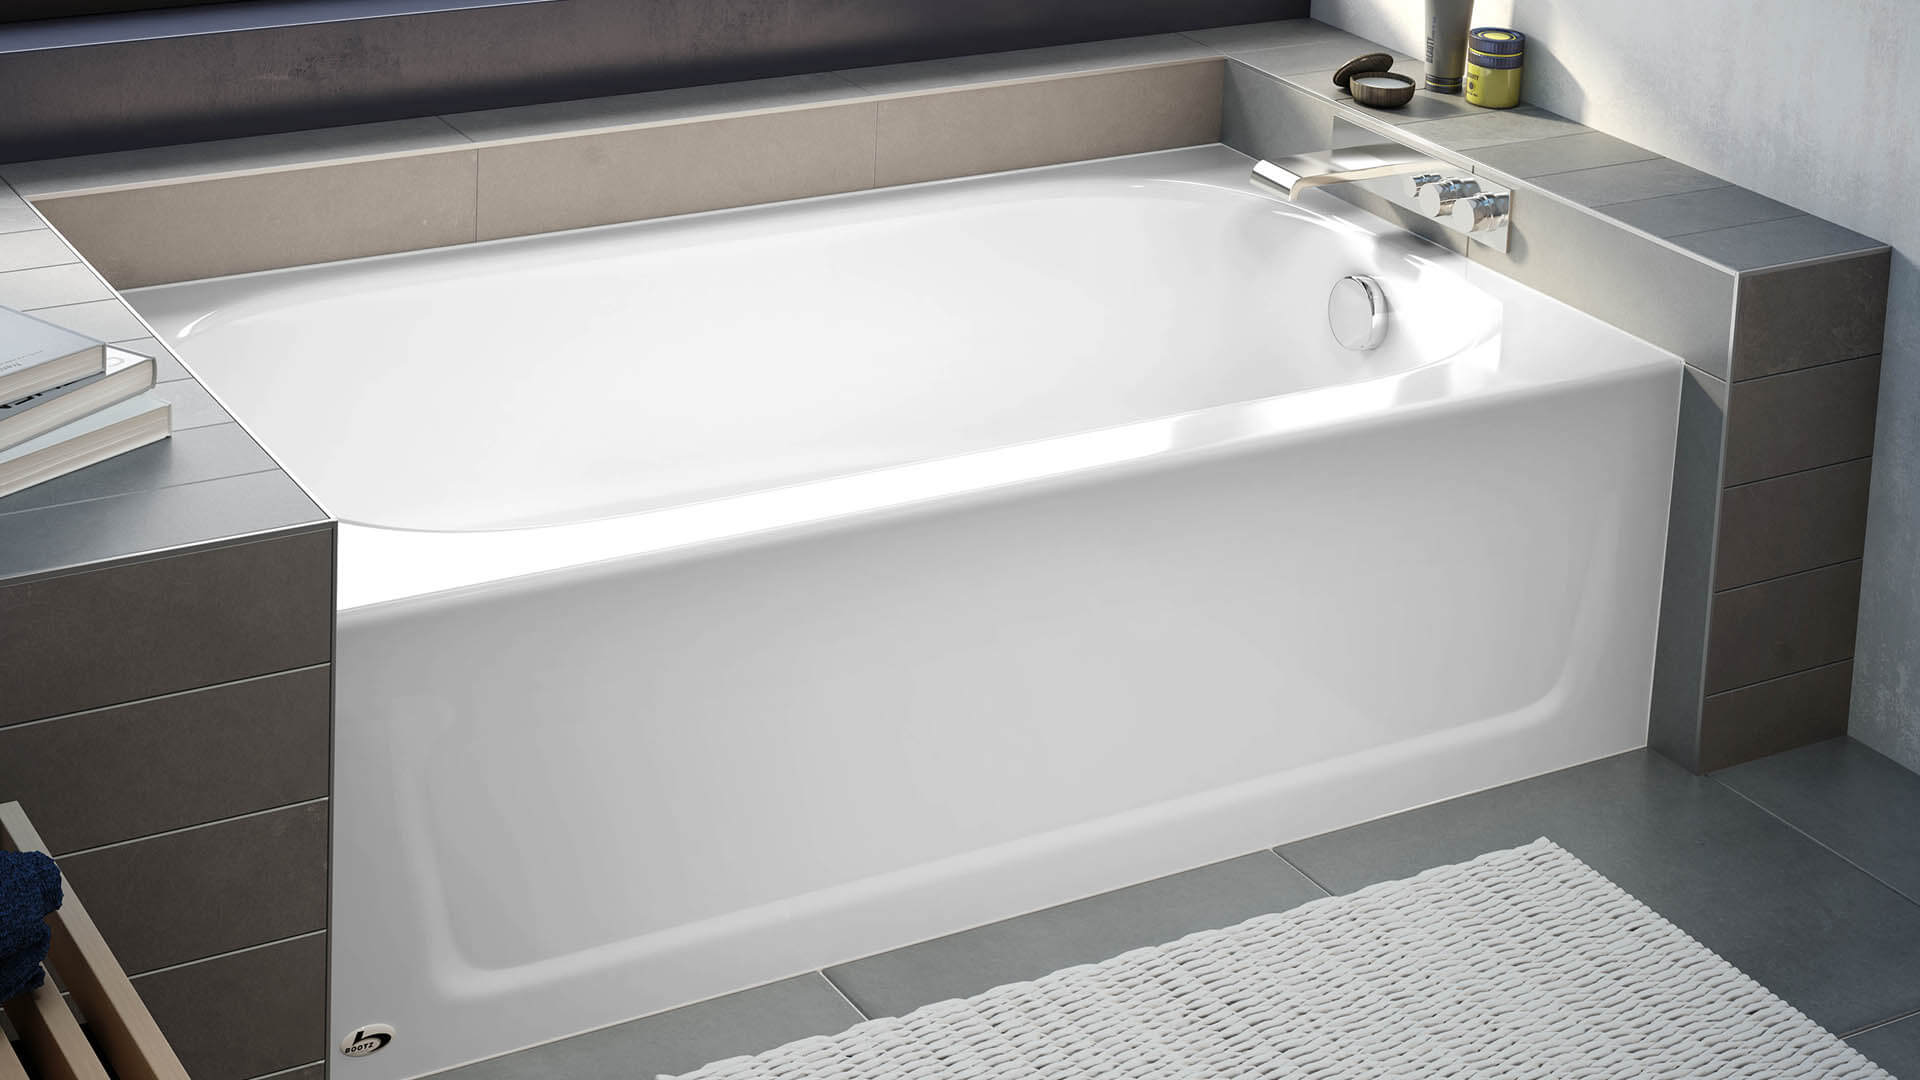 Questions To Consider Before Upgrading Your Tub